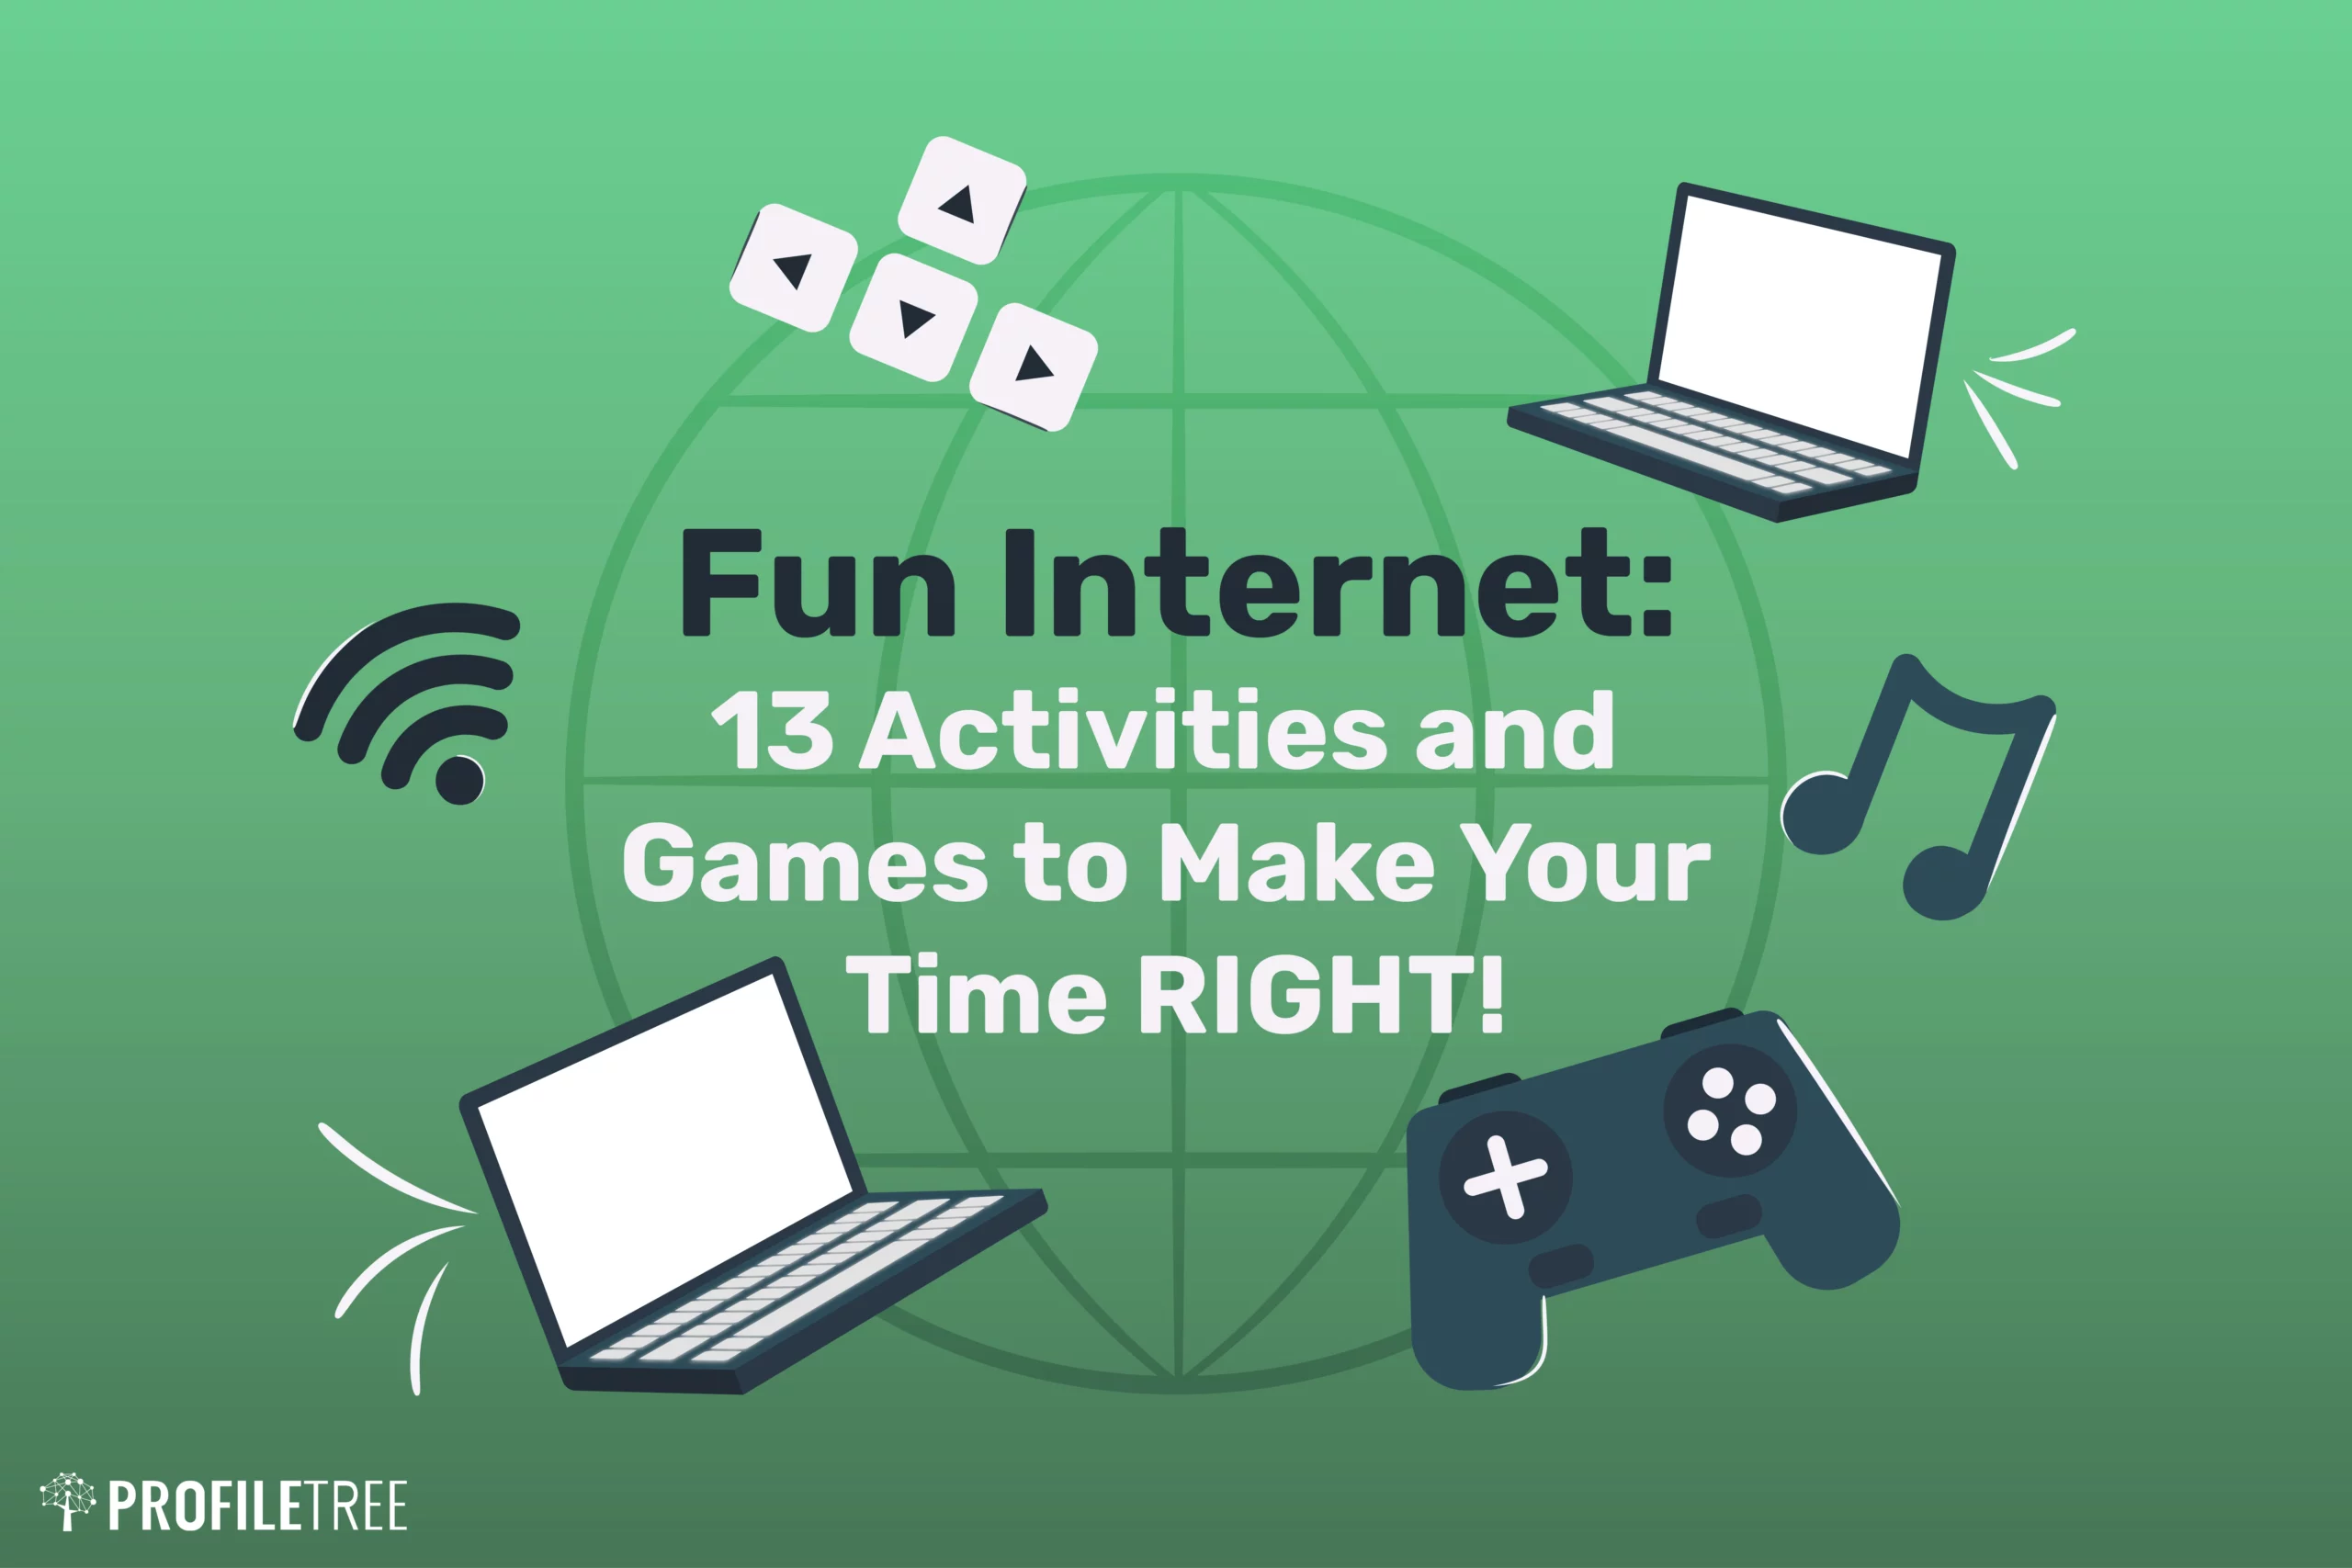 Fun Internet 13 Activities and Games to Make Your Time RIGHT